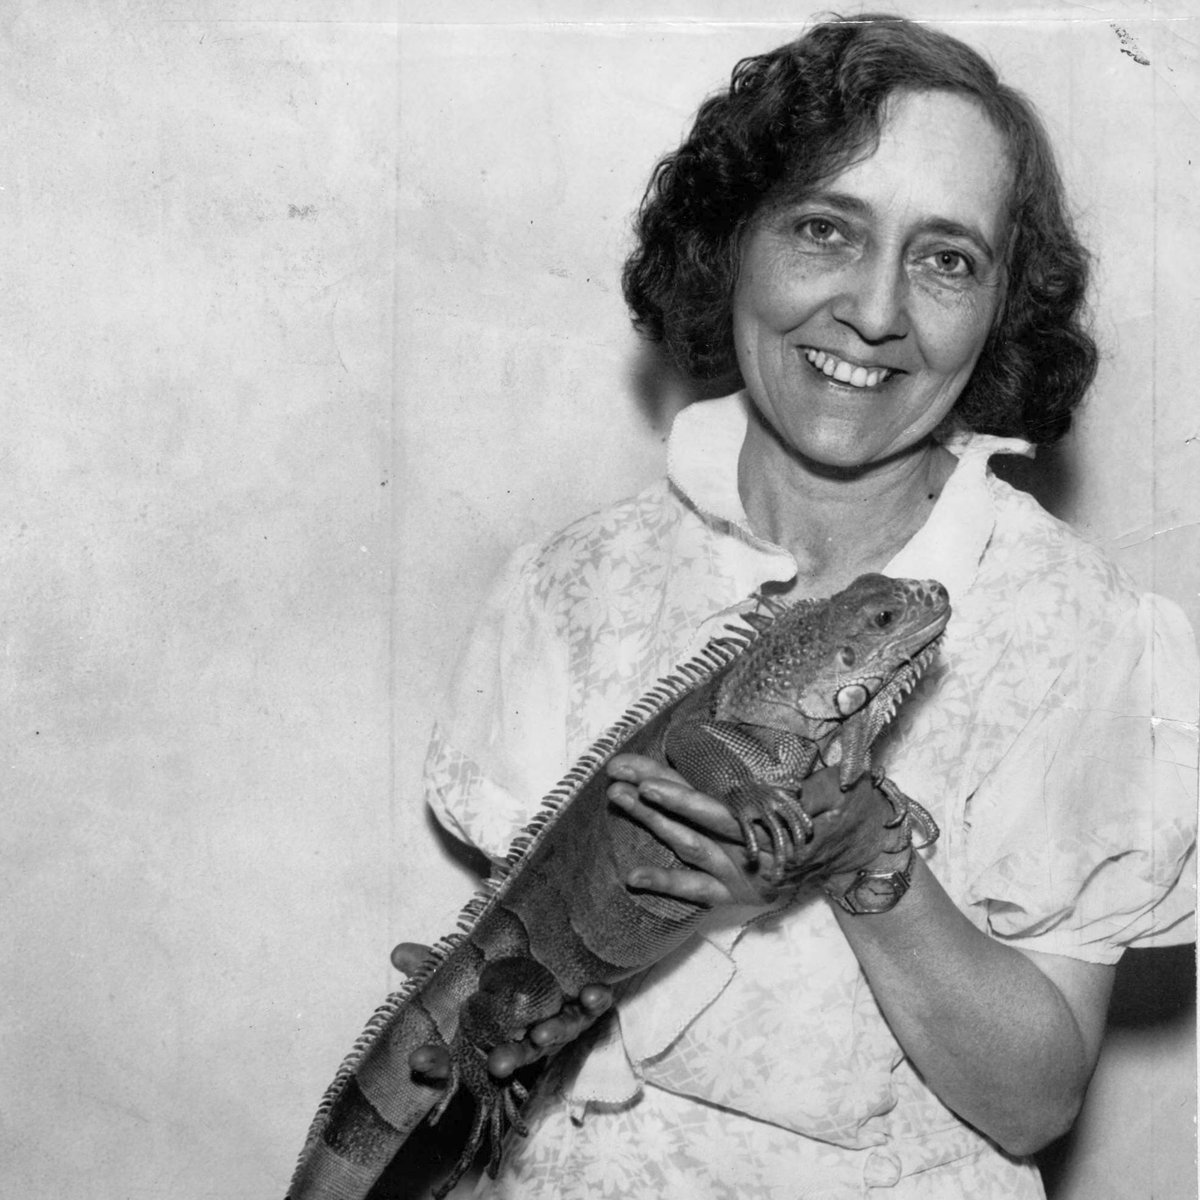 Grace Wiley “The Snake Lady' was a reptile trainer, snake enthusiast and Natural History Museum curator at the Minneapolis Public Library from 1922 until 1933. #ArchivesWomenInSTEM Learn more in Special Collections at Minneapolis Central Library.